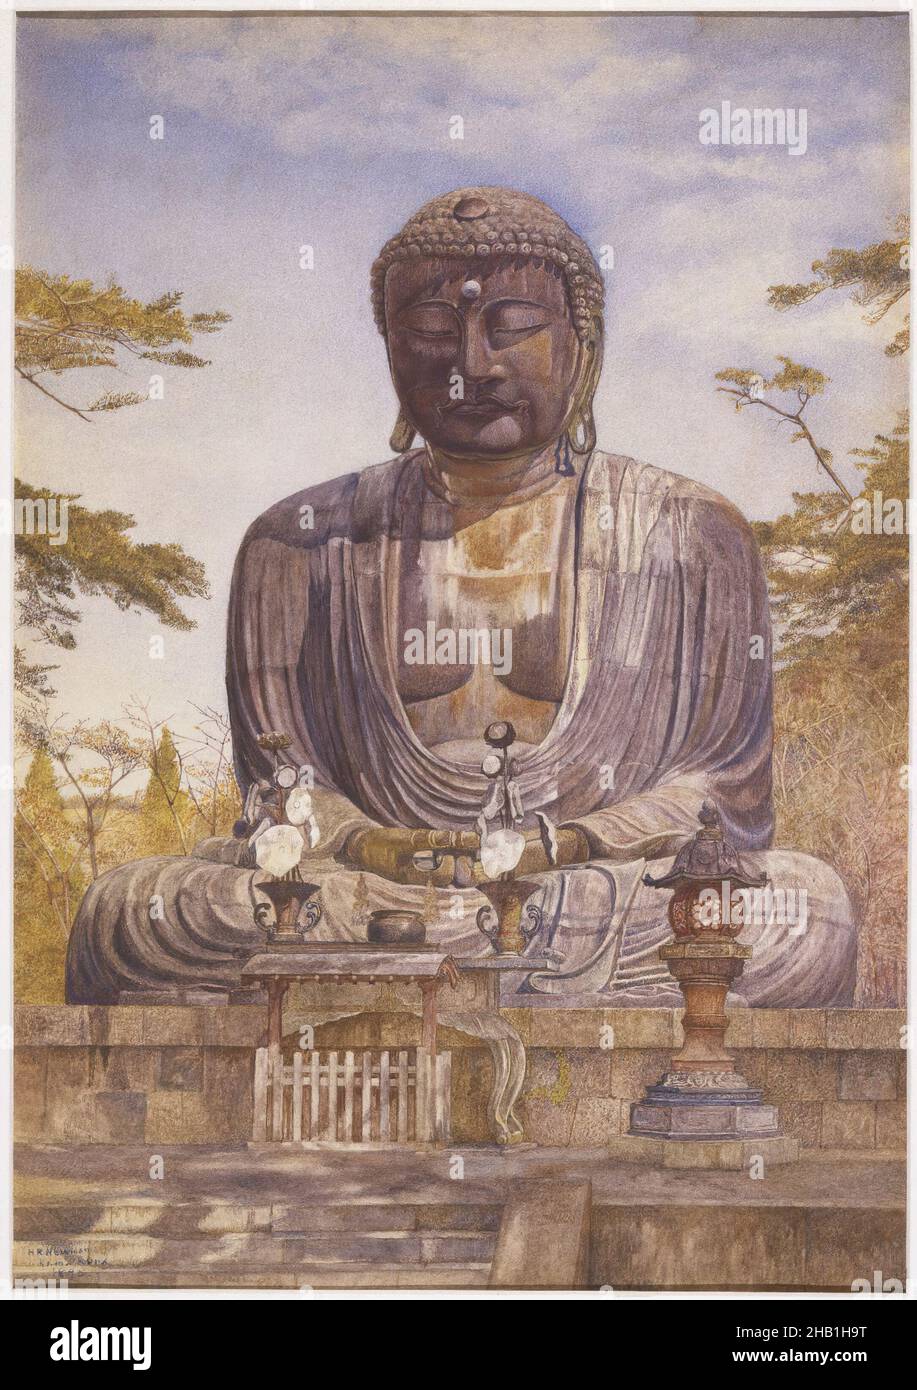 Daibutsu, Great Bronze Statue of Buddha at Kamakura, Japan, Henry Roderick Newman, American, 1843-1917, Watercolor and graphite on paper, 1898, 20 x 14 in., 50.8 x 35.6 cm, 19th Century, buddah, buddha, clouds, Japan, painting, painting of statue, seated, sky, somber, statue, watercolor, Watercolor and graphite on paper Stock Photo